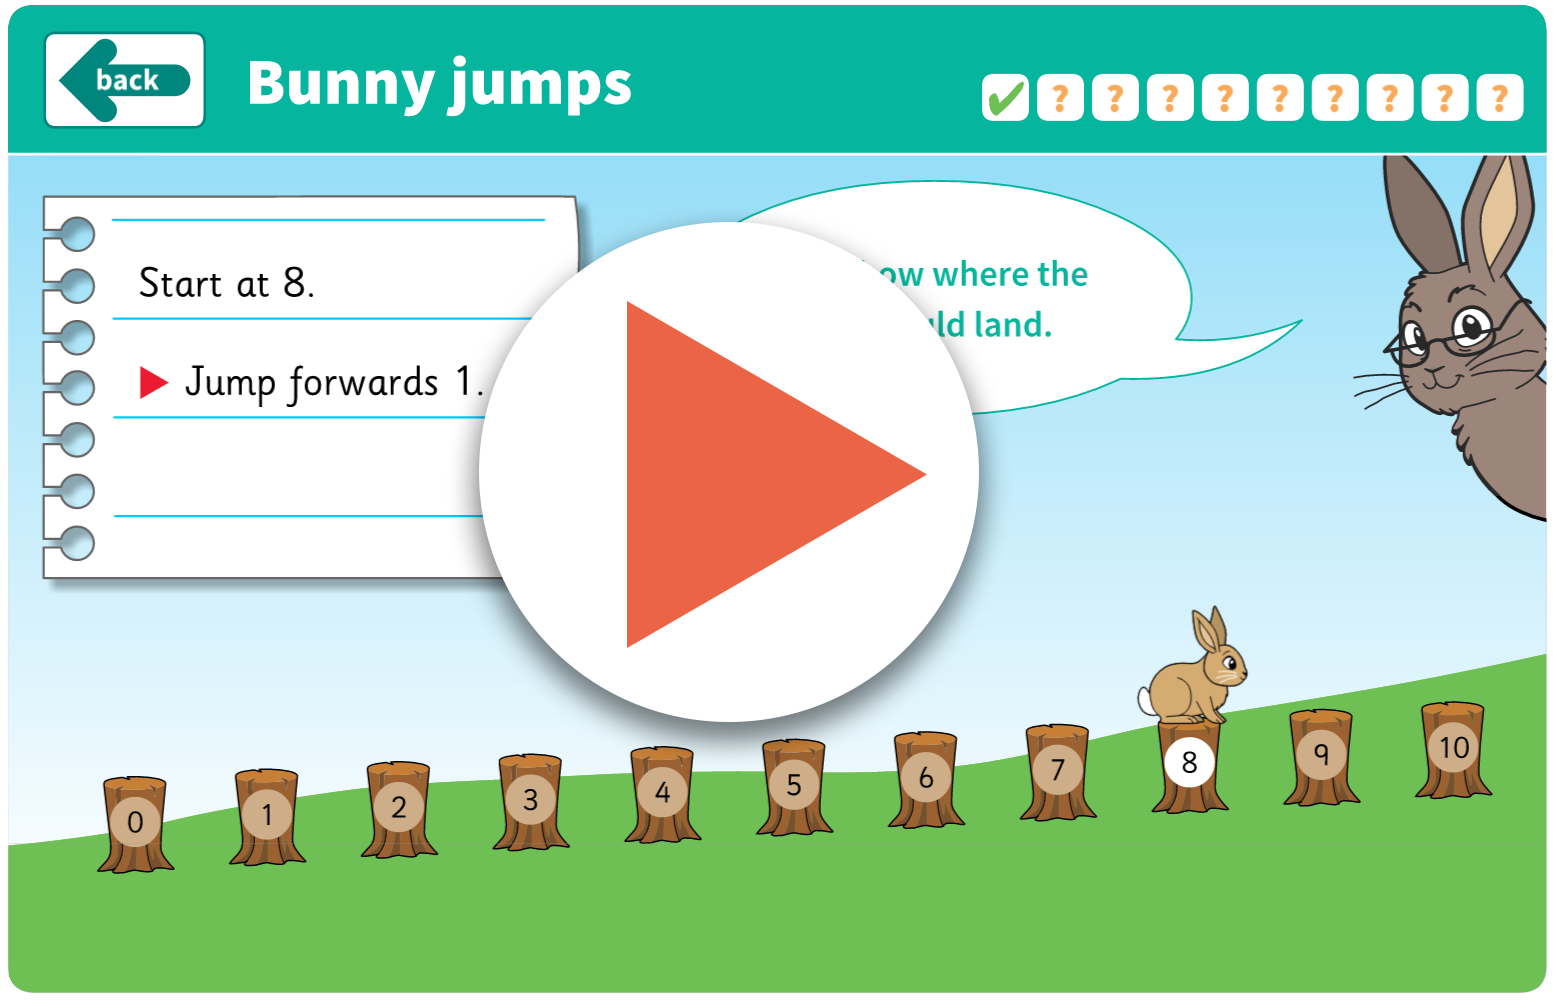 Bunny jumps game (interactive)